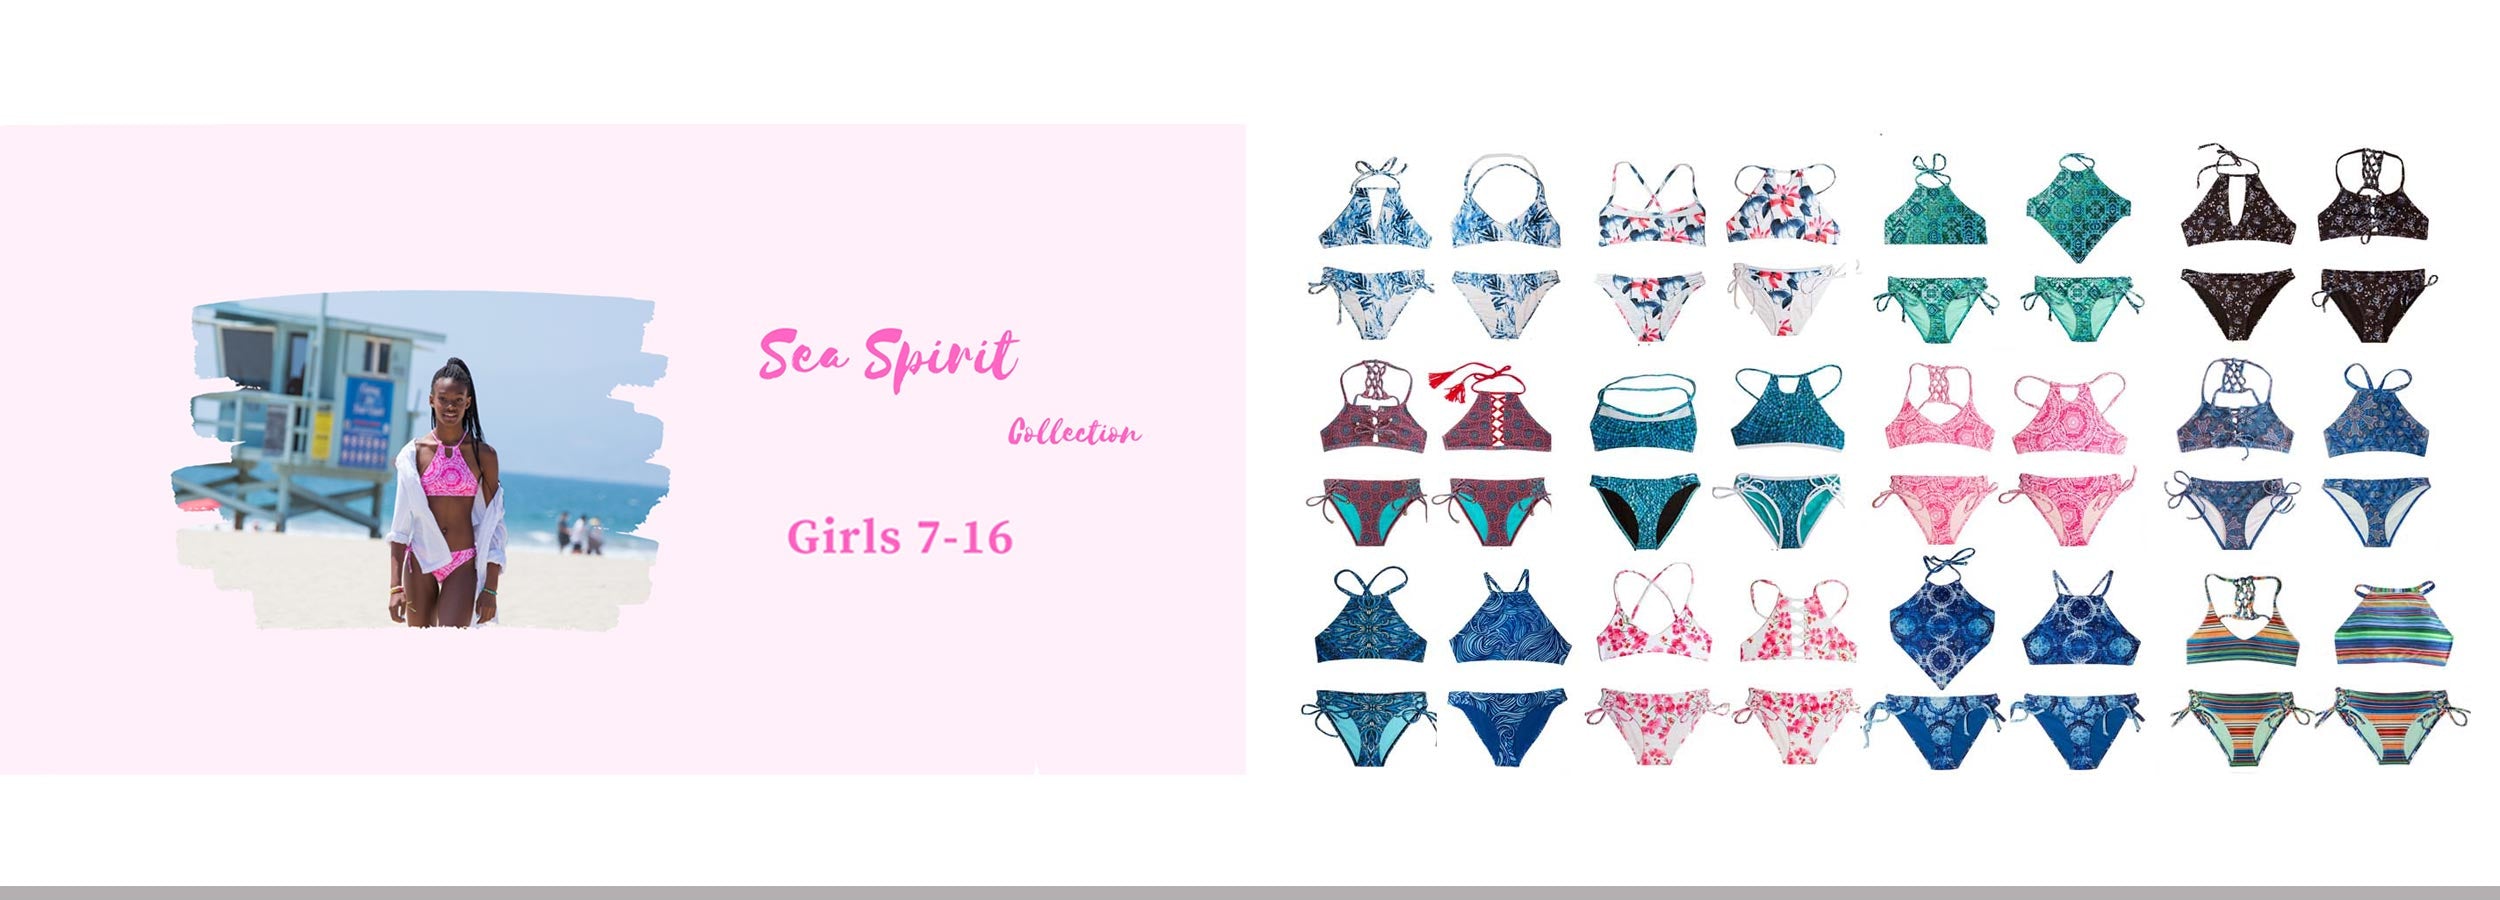 colorful-2 piece-swimsuit-sets girls-ages-7-16-Chanceloves-brand